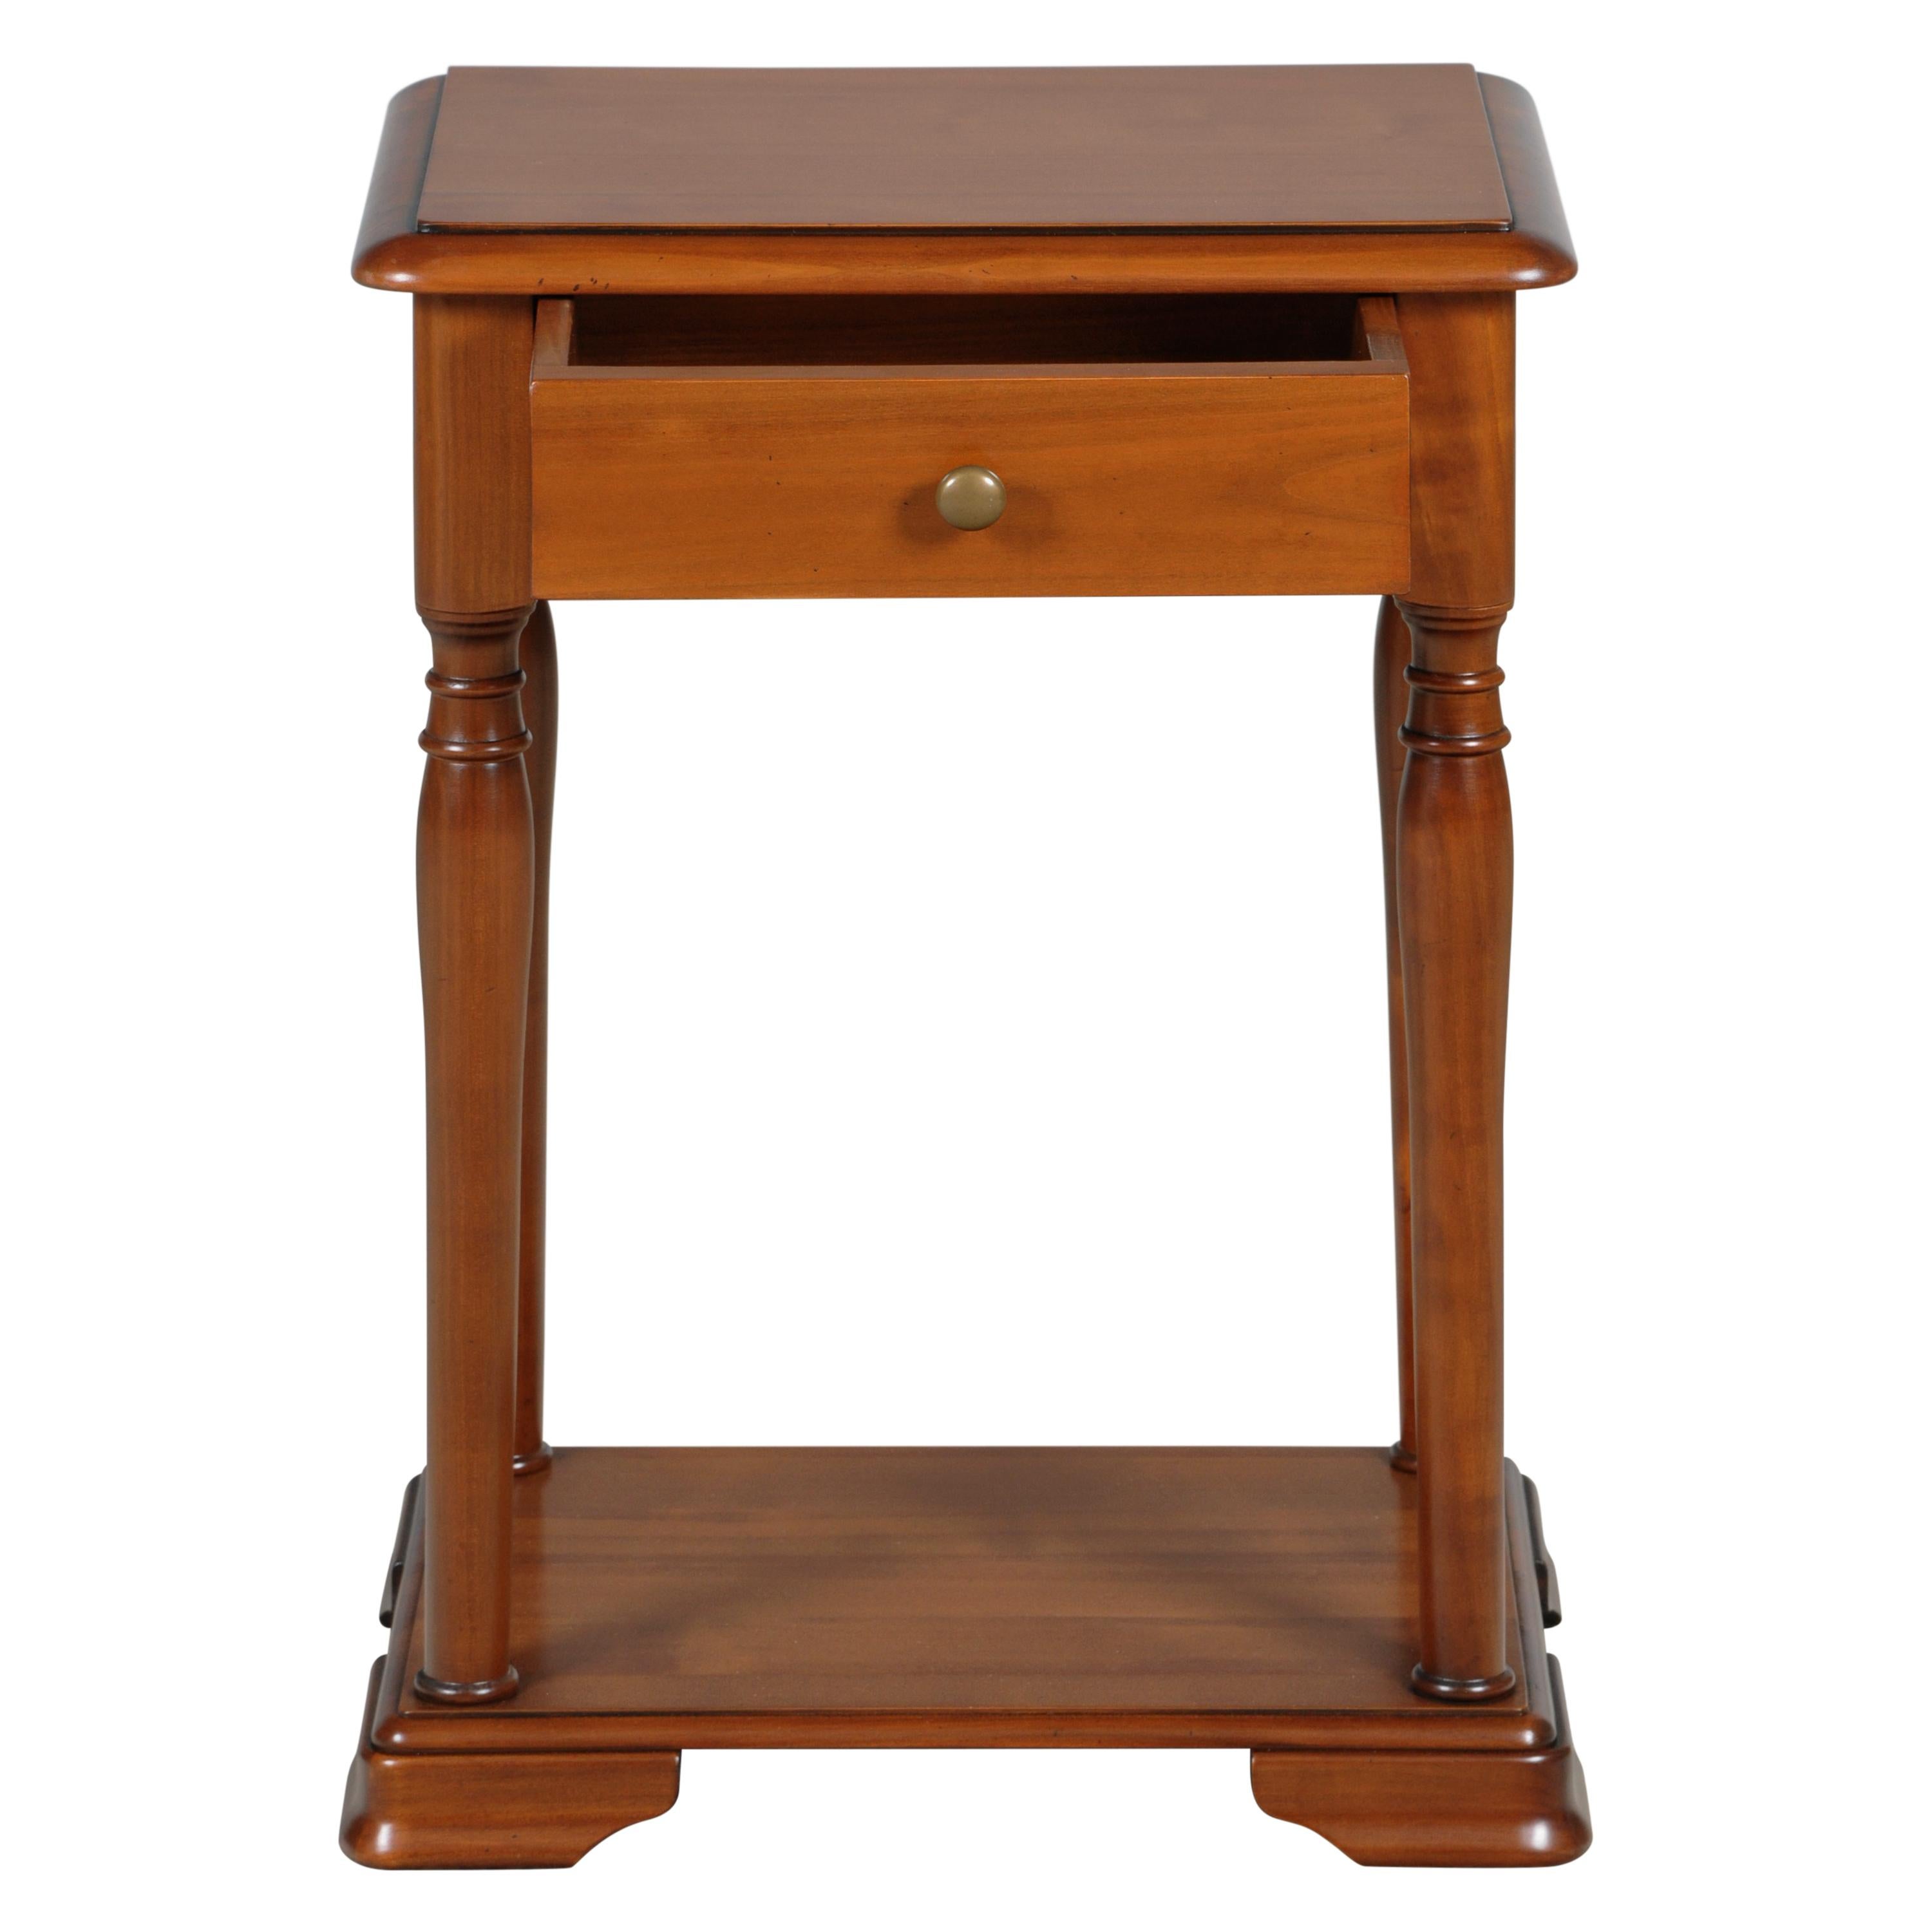 This bedside table is a handmade reproduction of the French Louis Philippe Style in the mid 19th century in France caracterized by its curved moldings, hand-curved feet and rounded design.

1 drawer is integrated n the front with an 